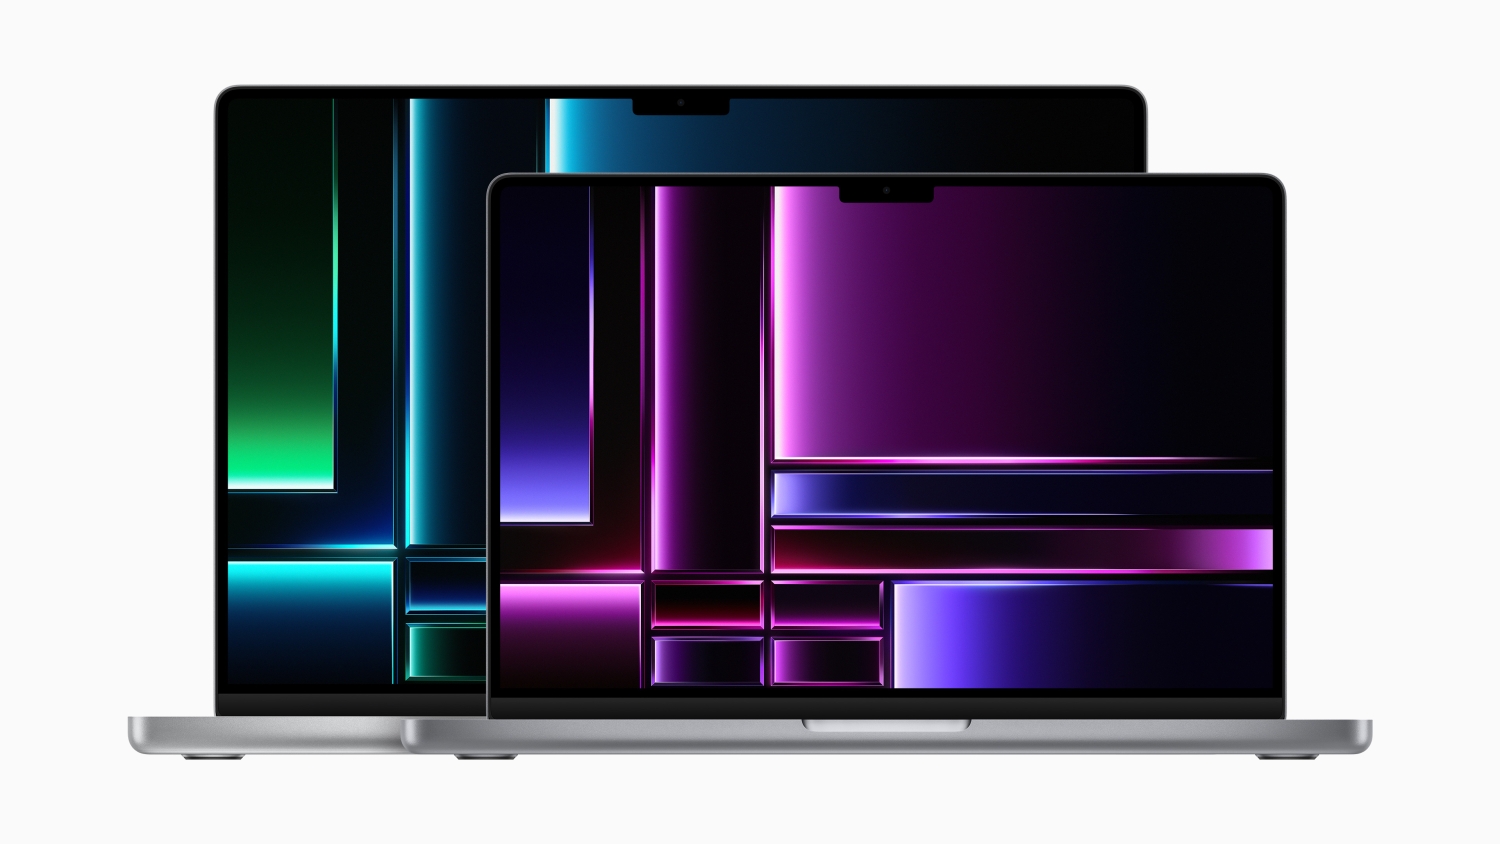 The 14-inch MacBook Pro with M2 chips in front of the 16-inch MacBook Pro with M2 chips.